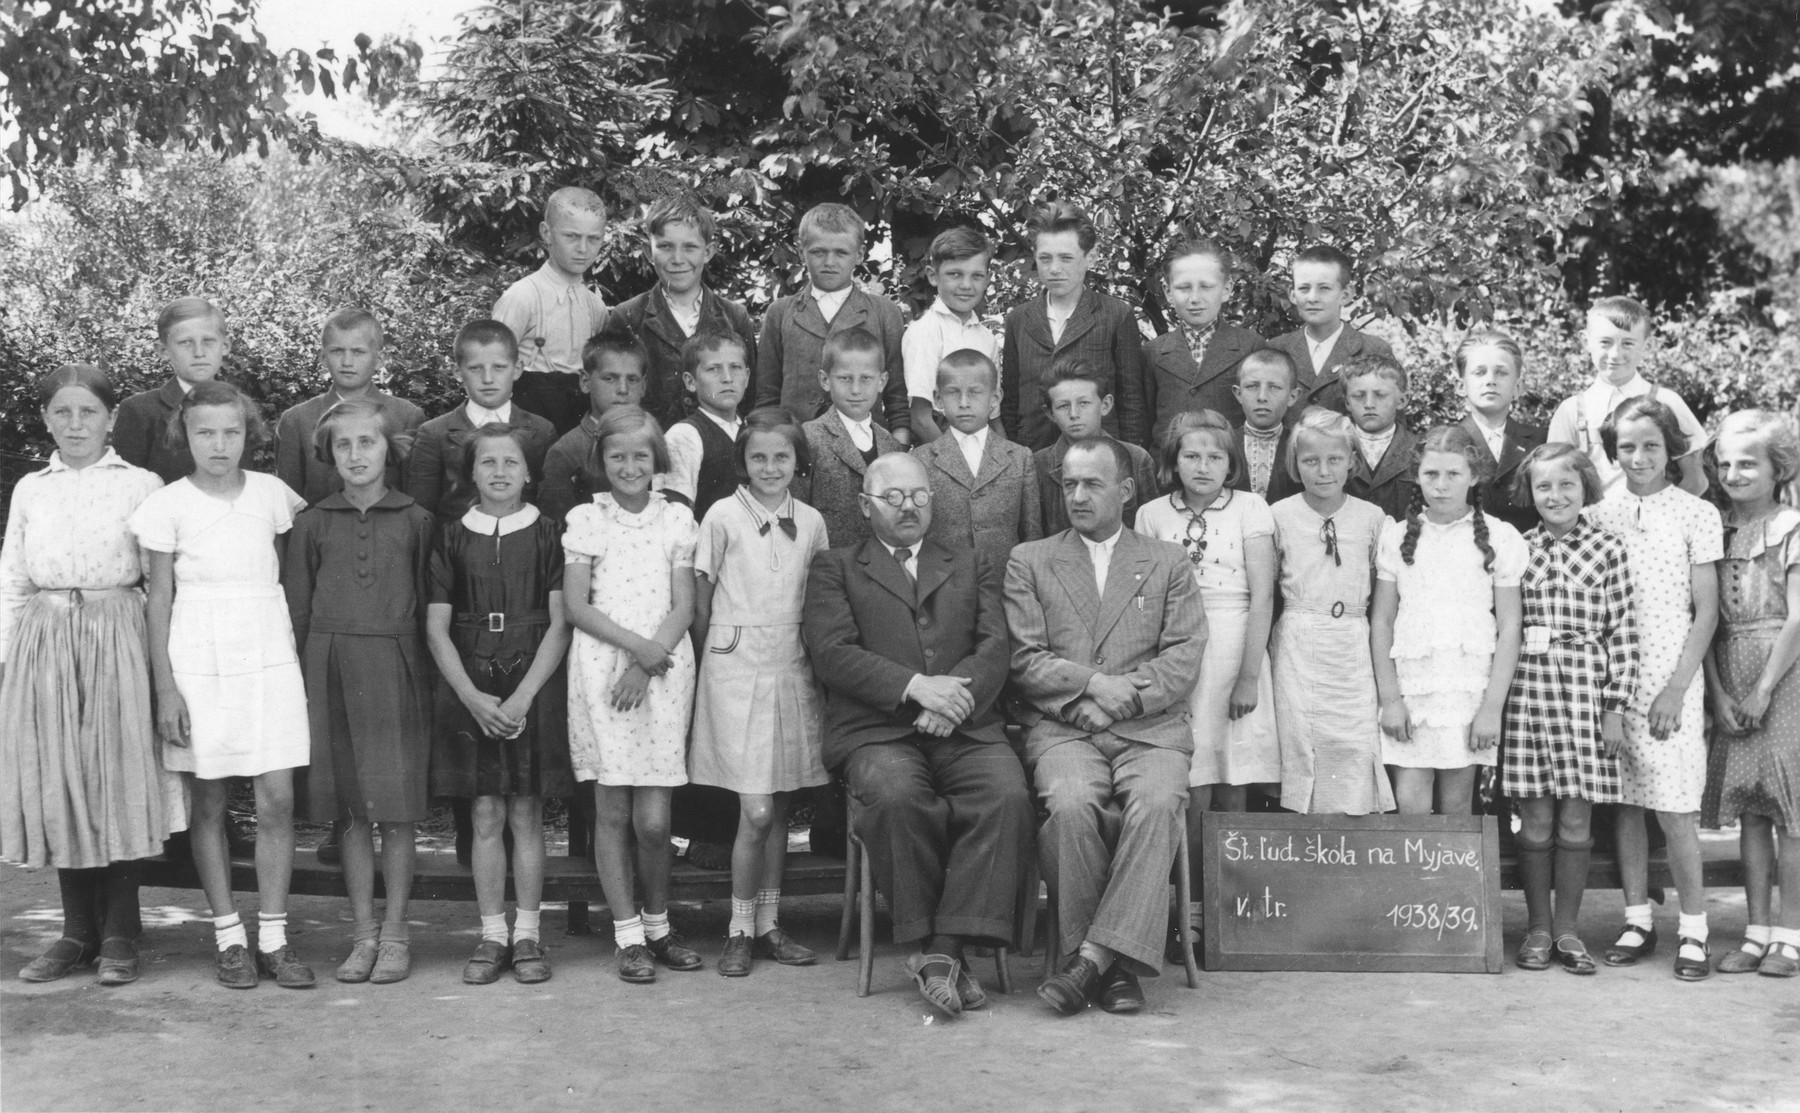 Group portrait of the fifth grade class at the Myjava public school.

Among those pictured is Magdalena Beck (front row, fourth from the right).